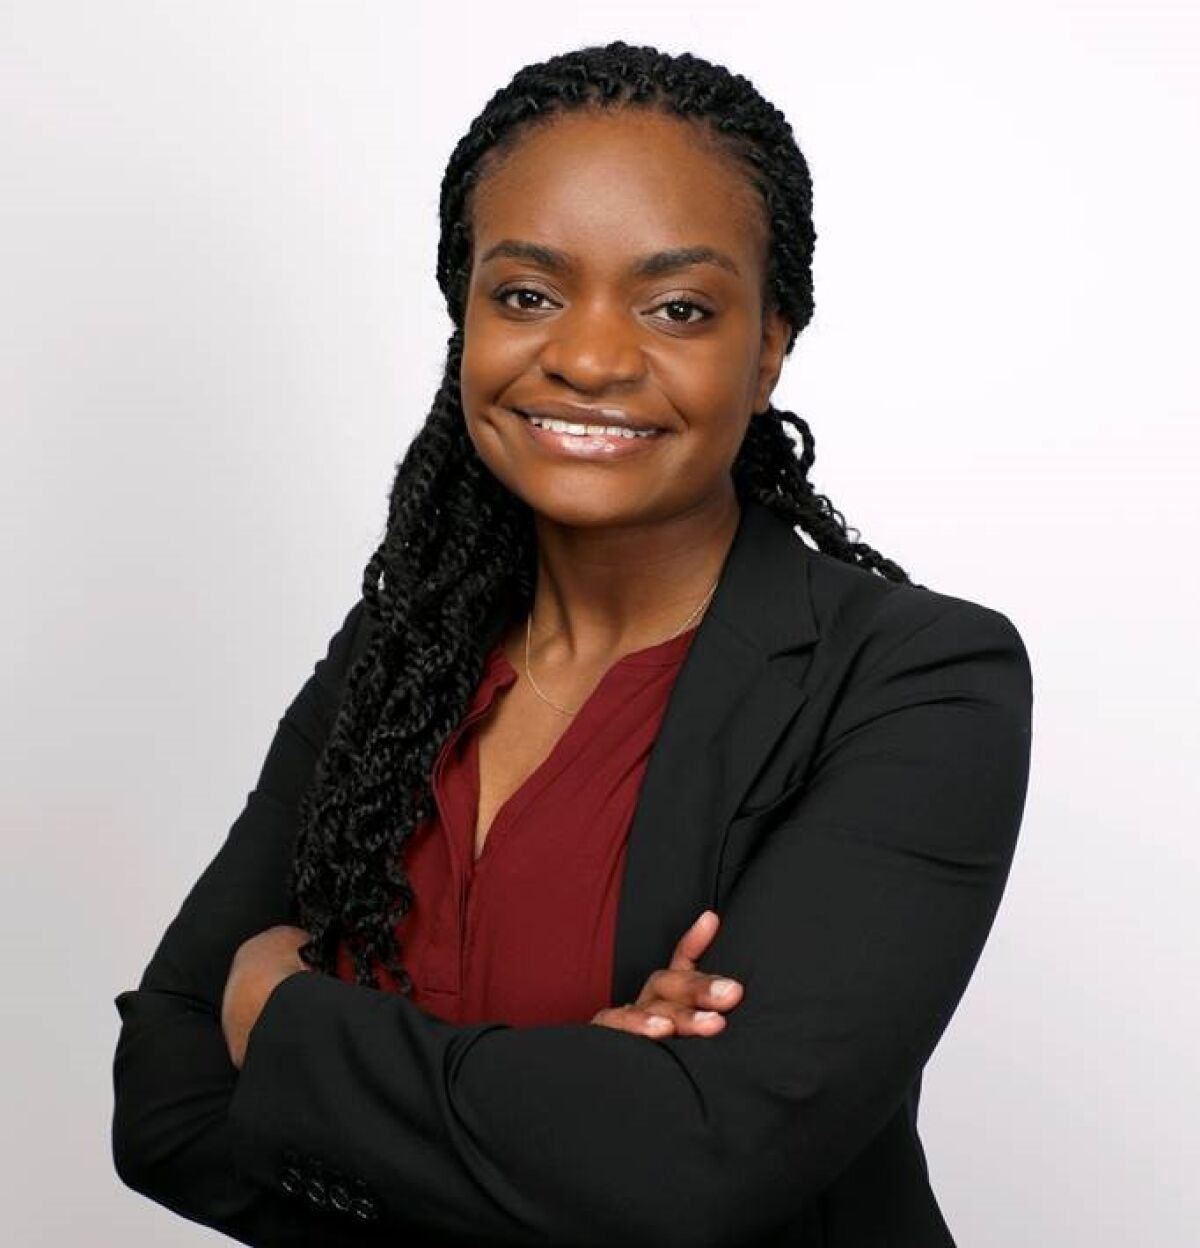 Ifeoma Ozoma, former public policy and social media impact manager at Pinterest